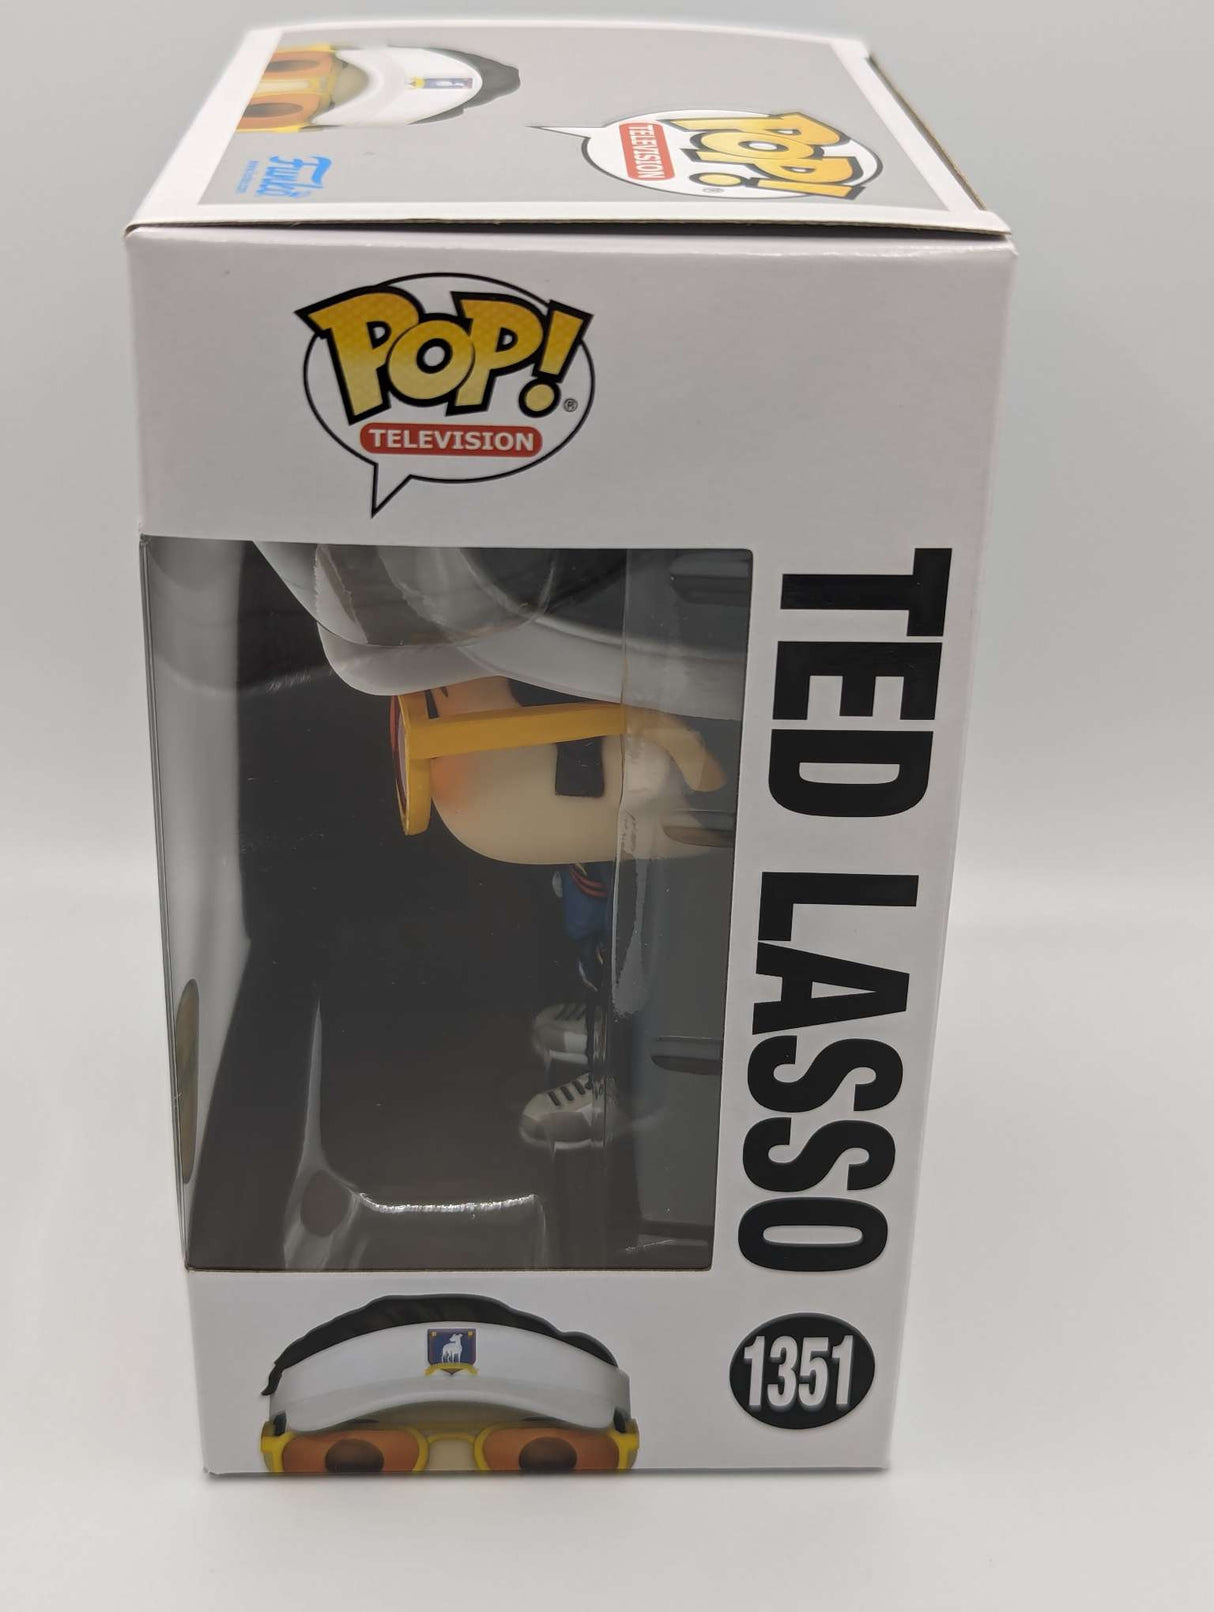 Funko Pop Television | Ted Lasso Coach with Glasses | Chase Edition #1351